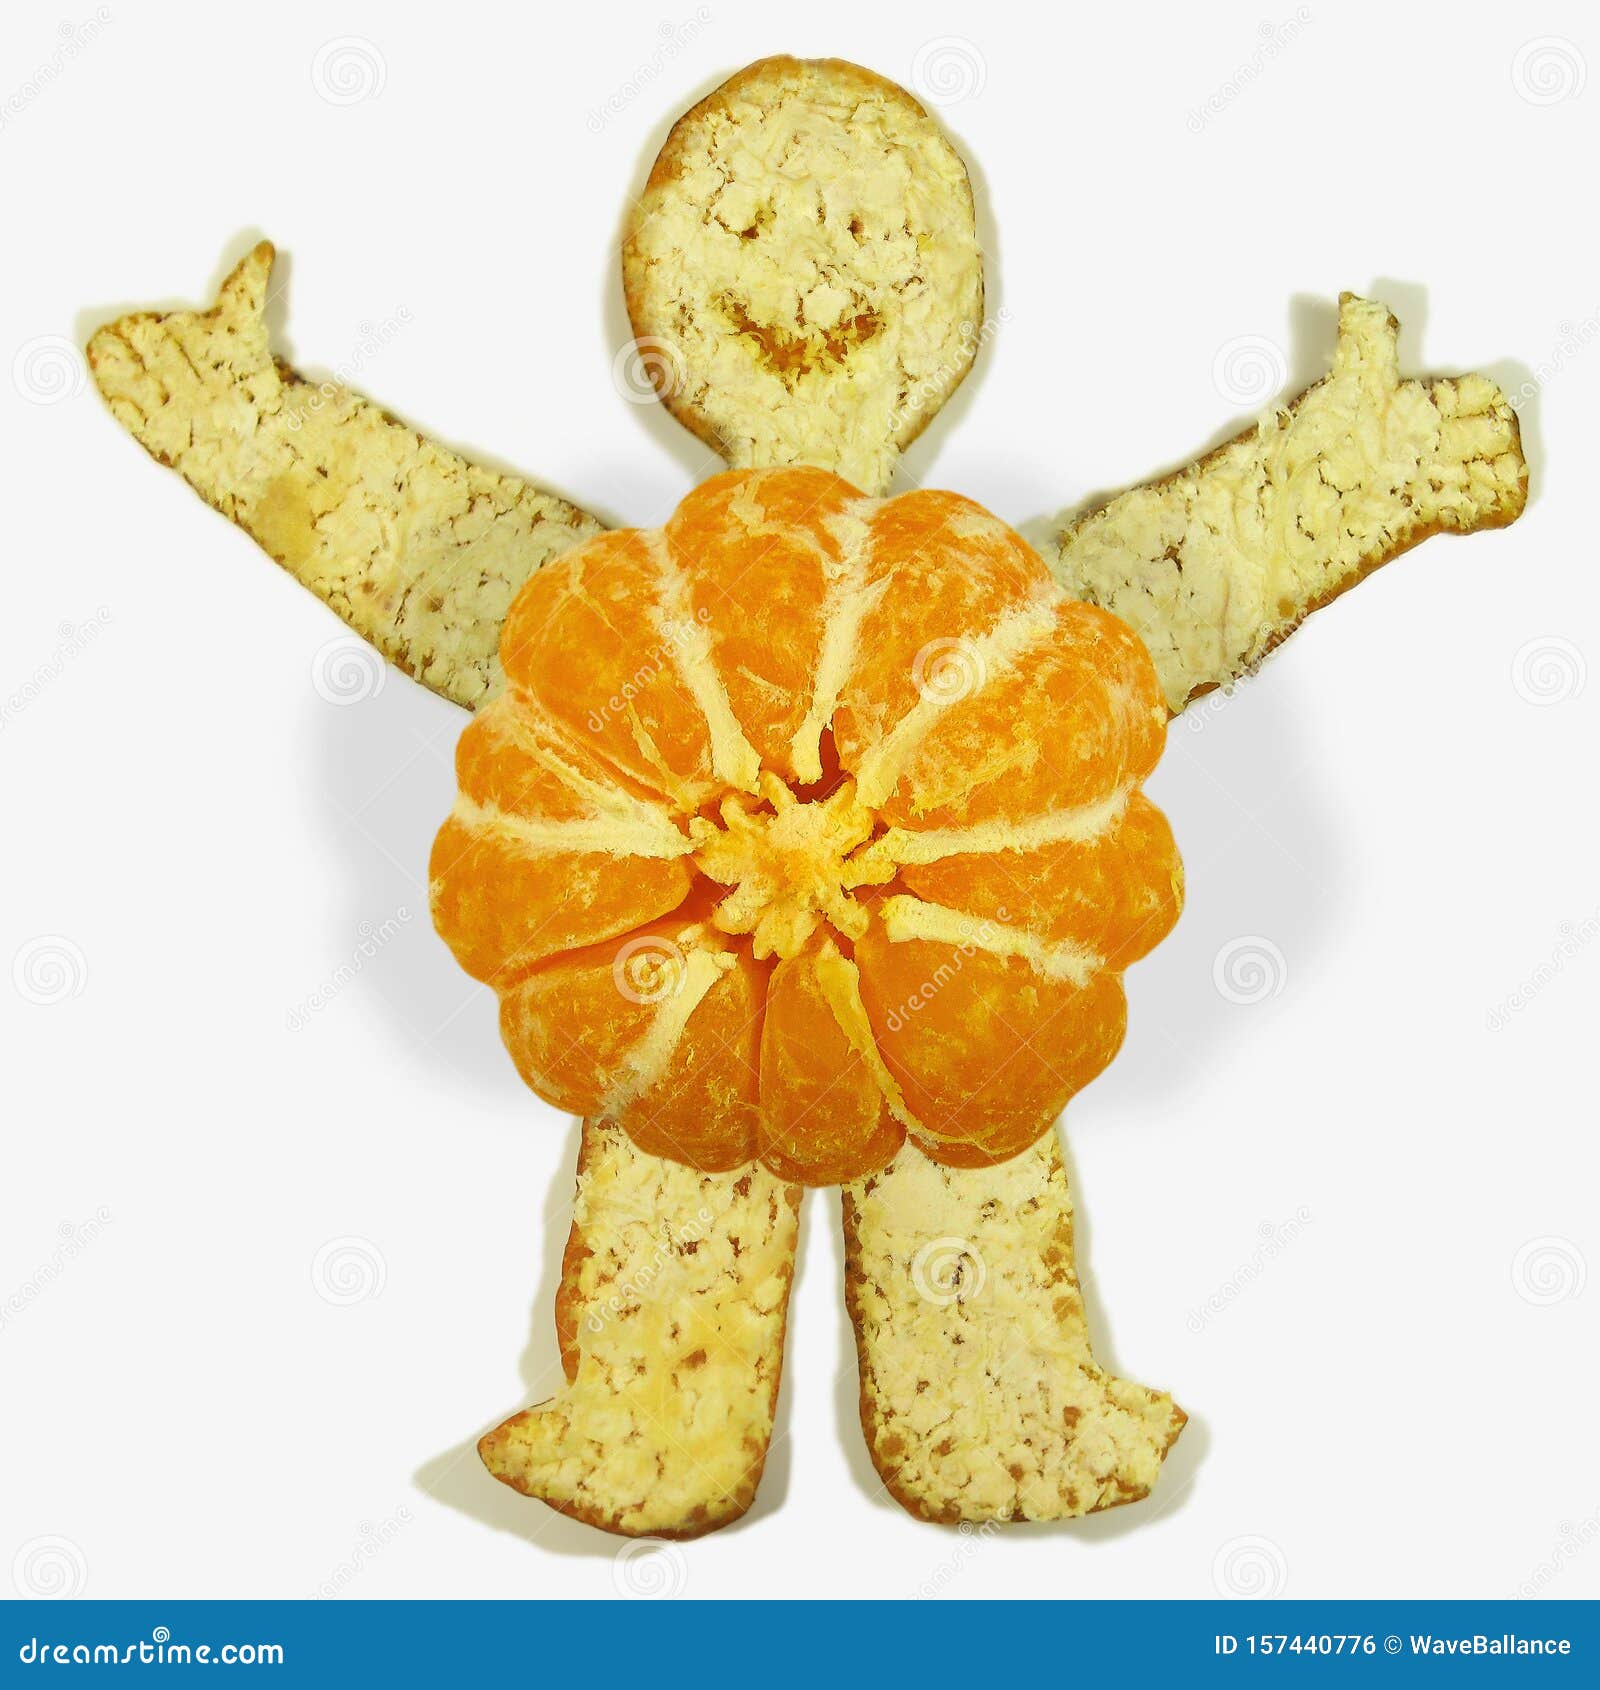 Happy Smiling Man With Handles And Legs Made Of Peeled Ripe Orange